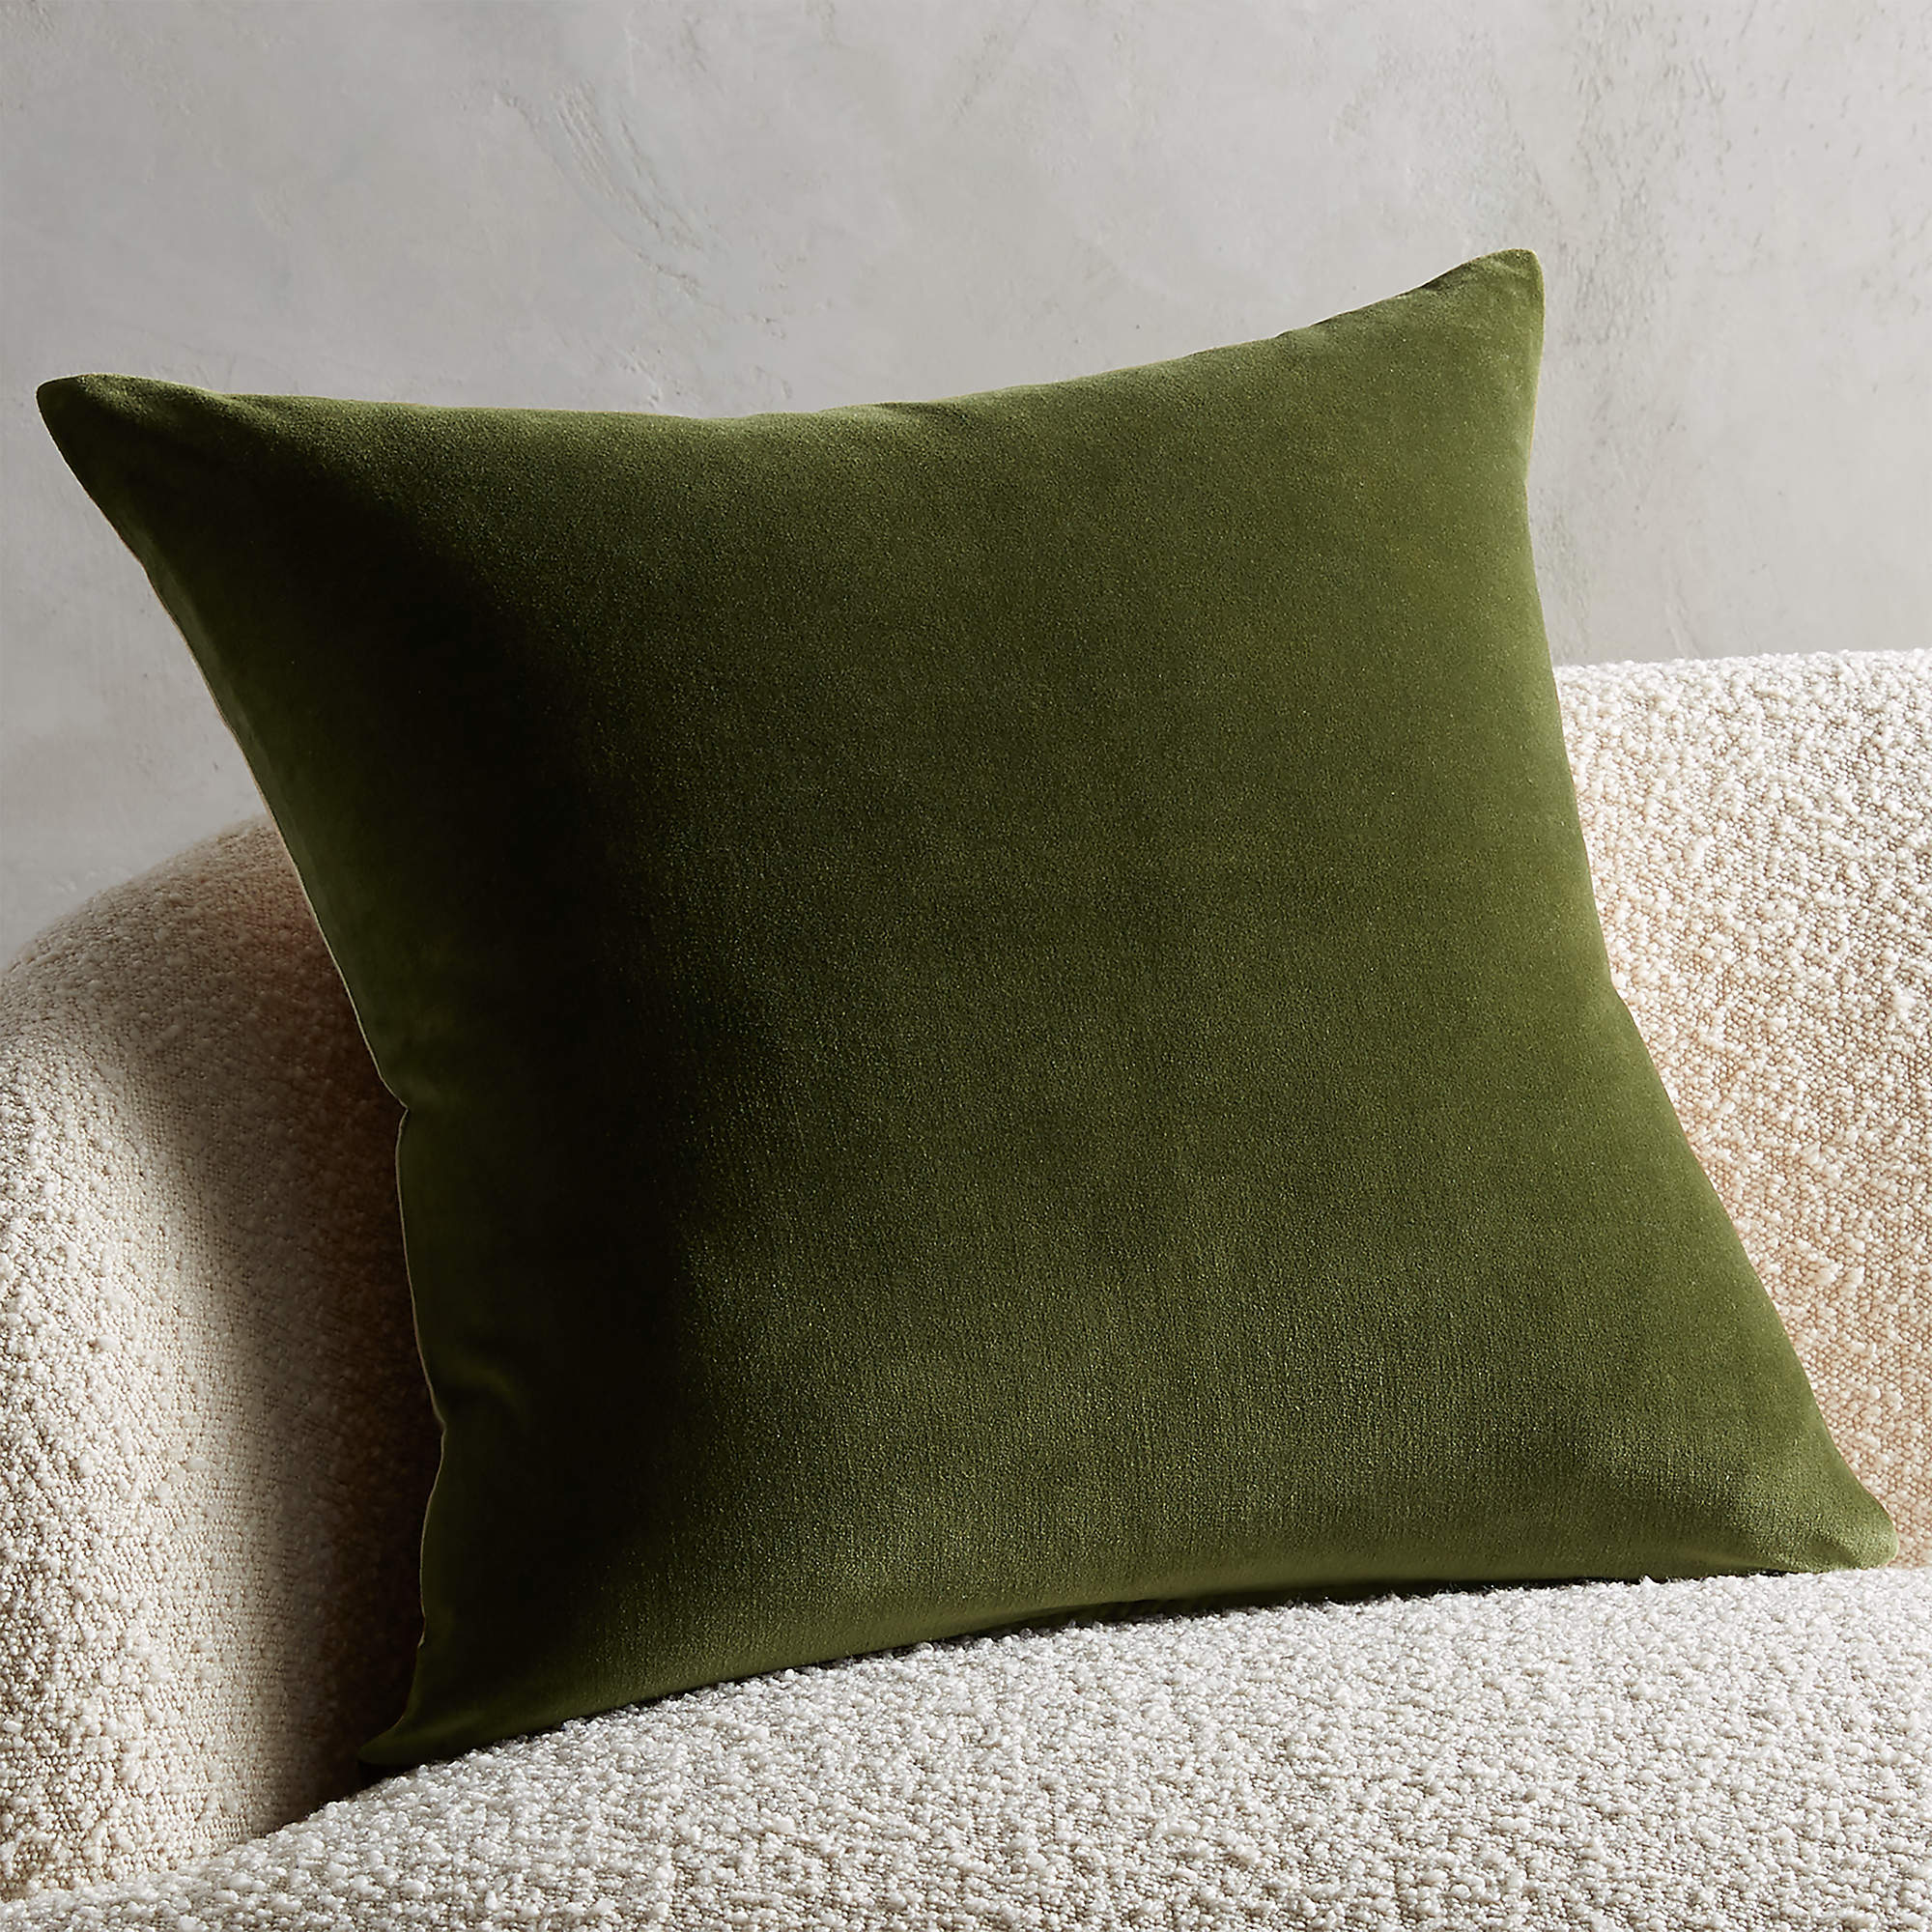 Shop 23" LEISURE OLIVE GREEN PILLOW WITH DOWN-ALTERNATIVE INSERT from CB2 on Openhaus